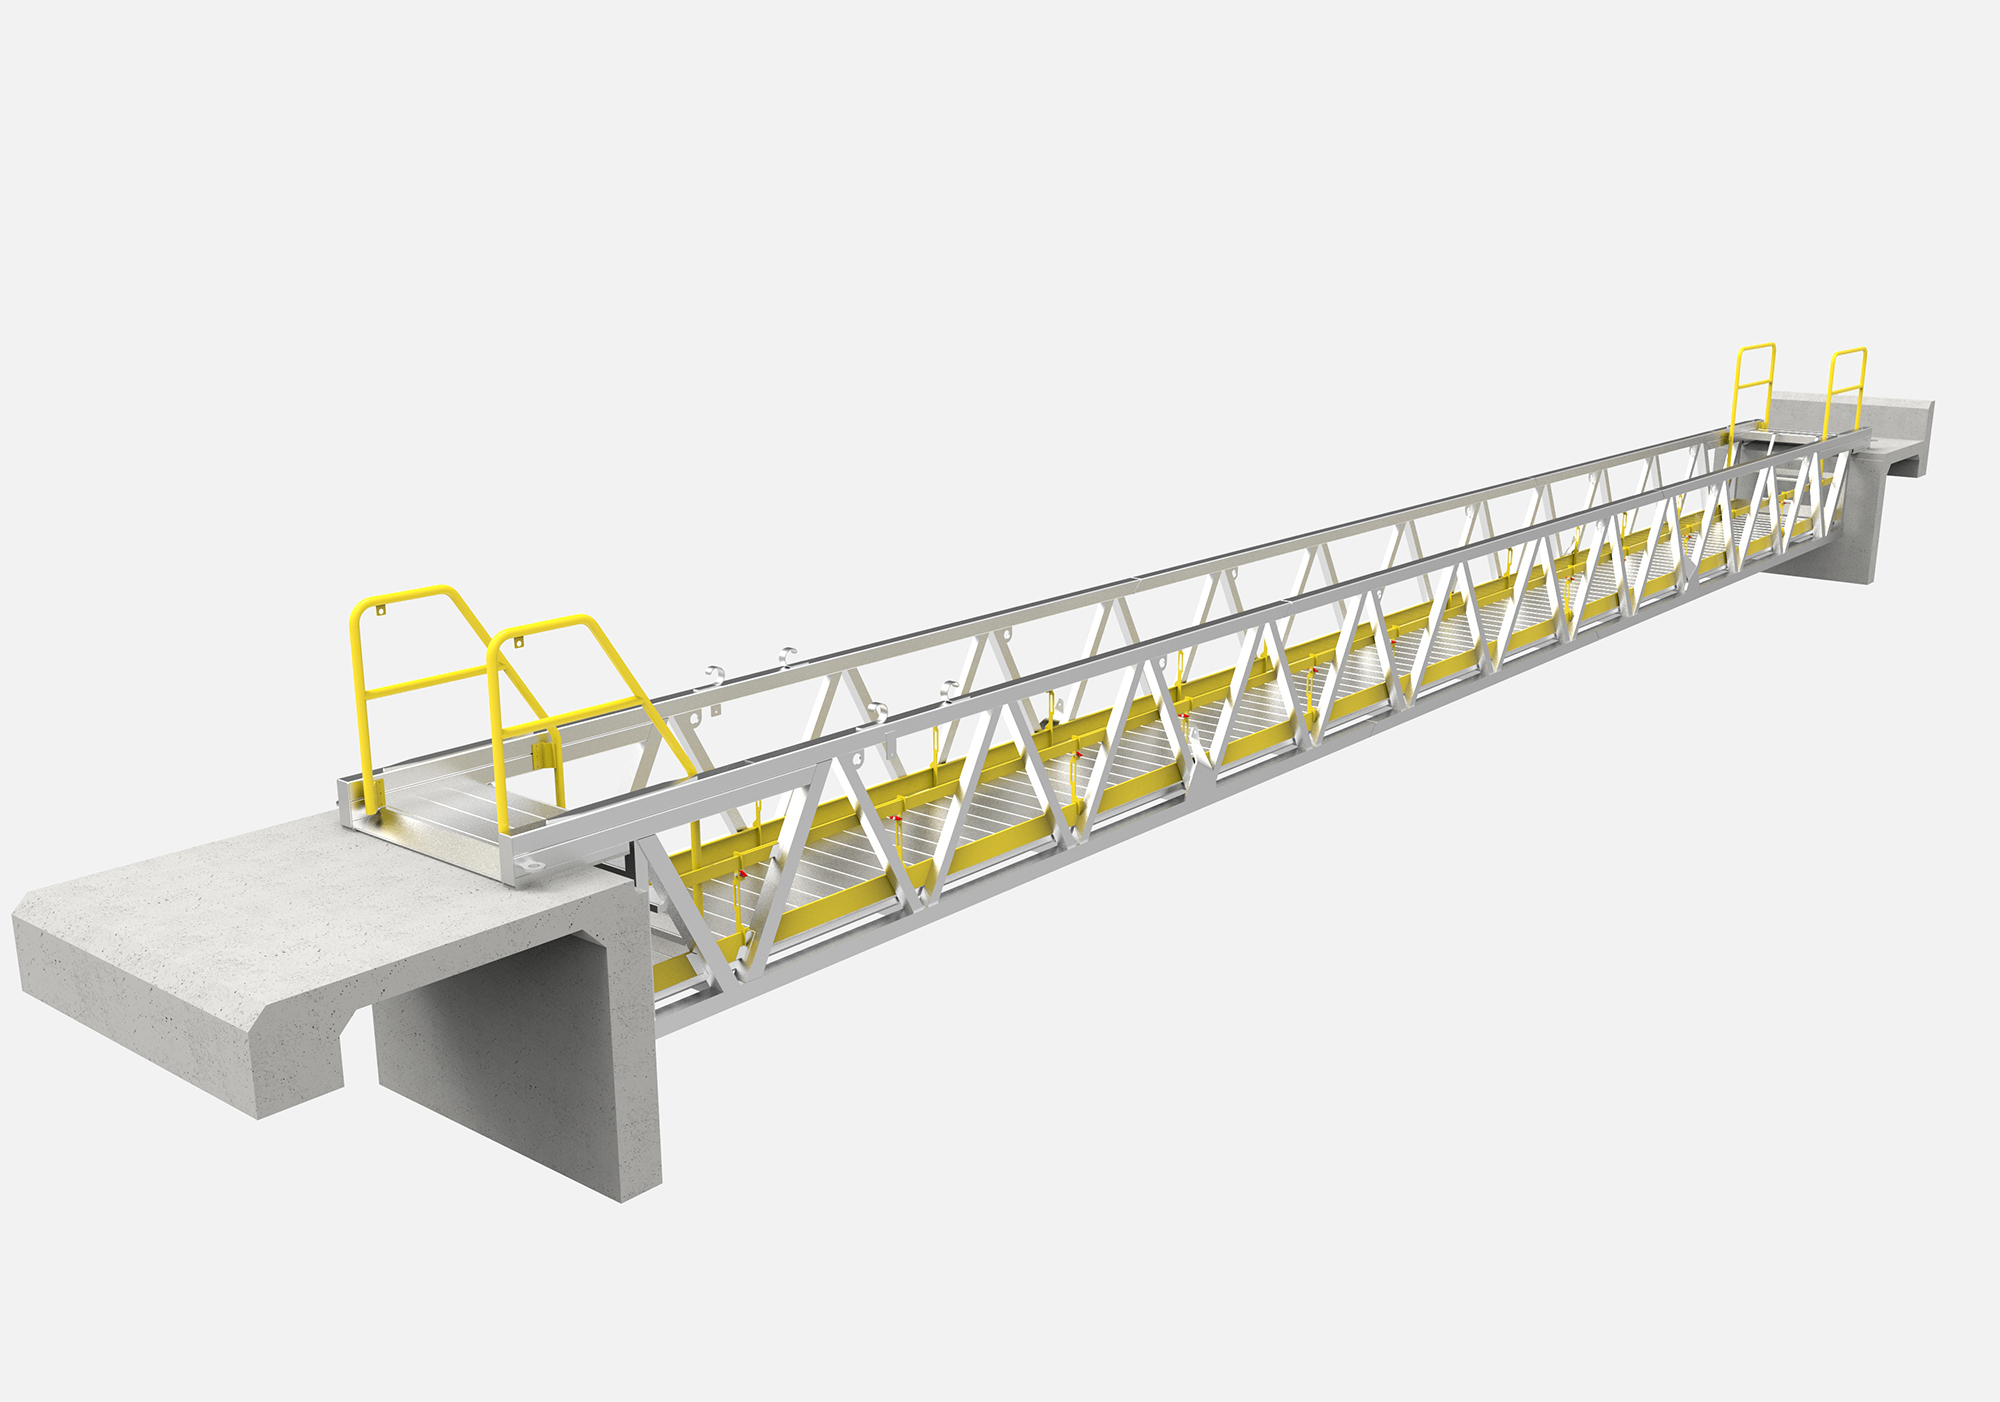 Custom pedestrian bridge for use as industrial gangway in aluminum smelter facility